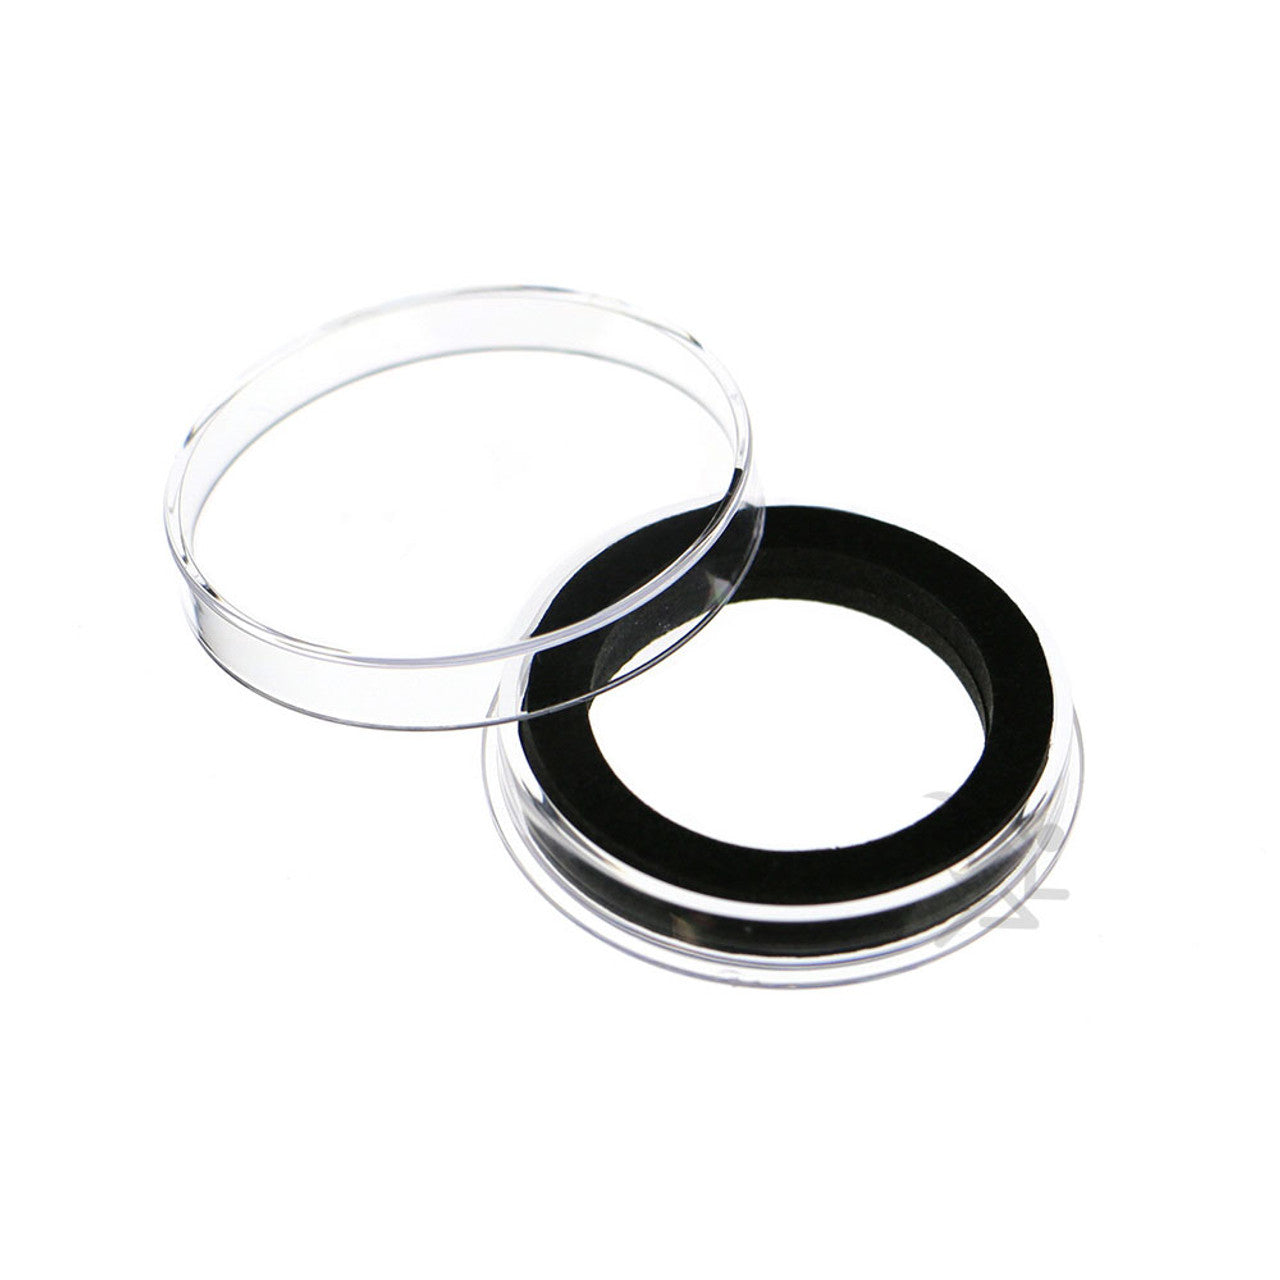 High Relief 32mm Ring Fit Coin Capsule Holders